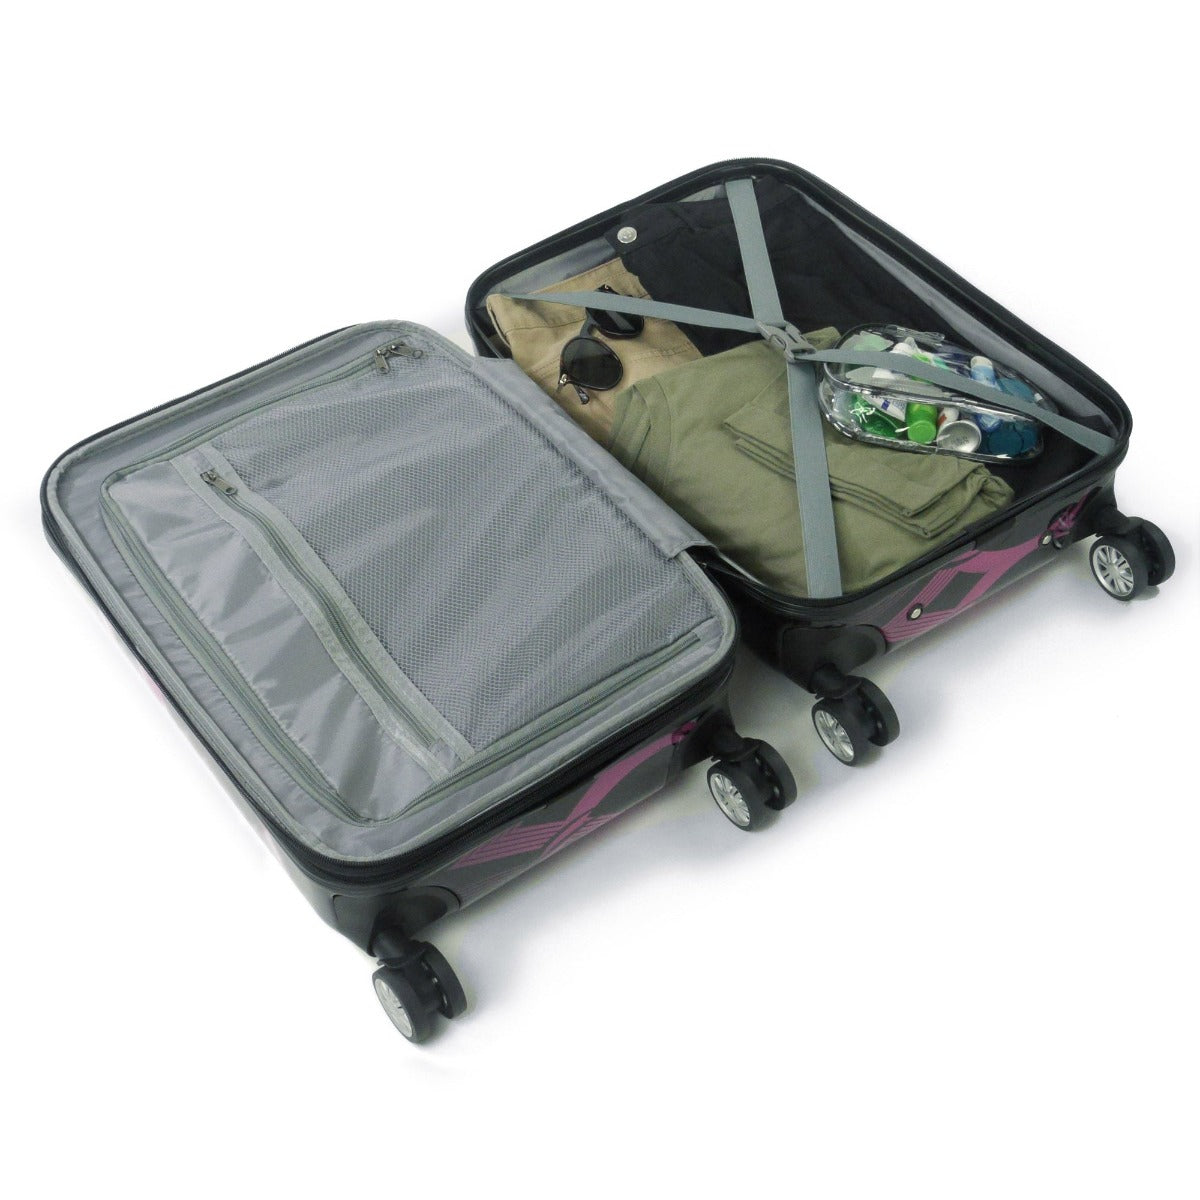 FUL Rolling Luggage Pink Neon Laser 24" Interior